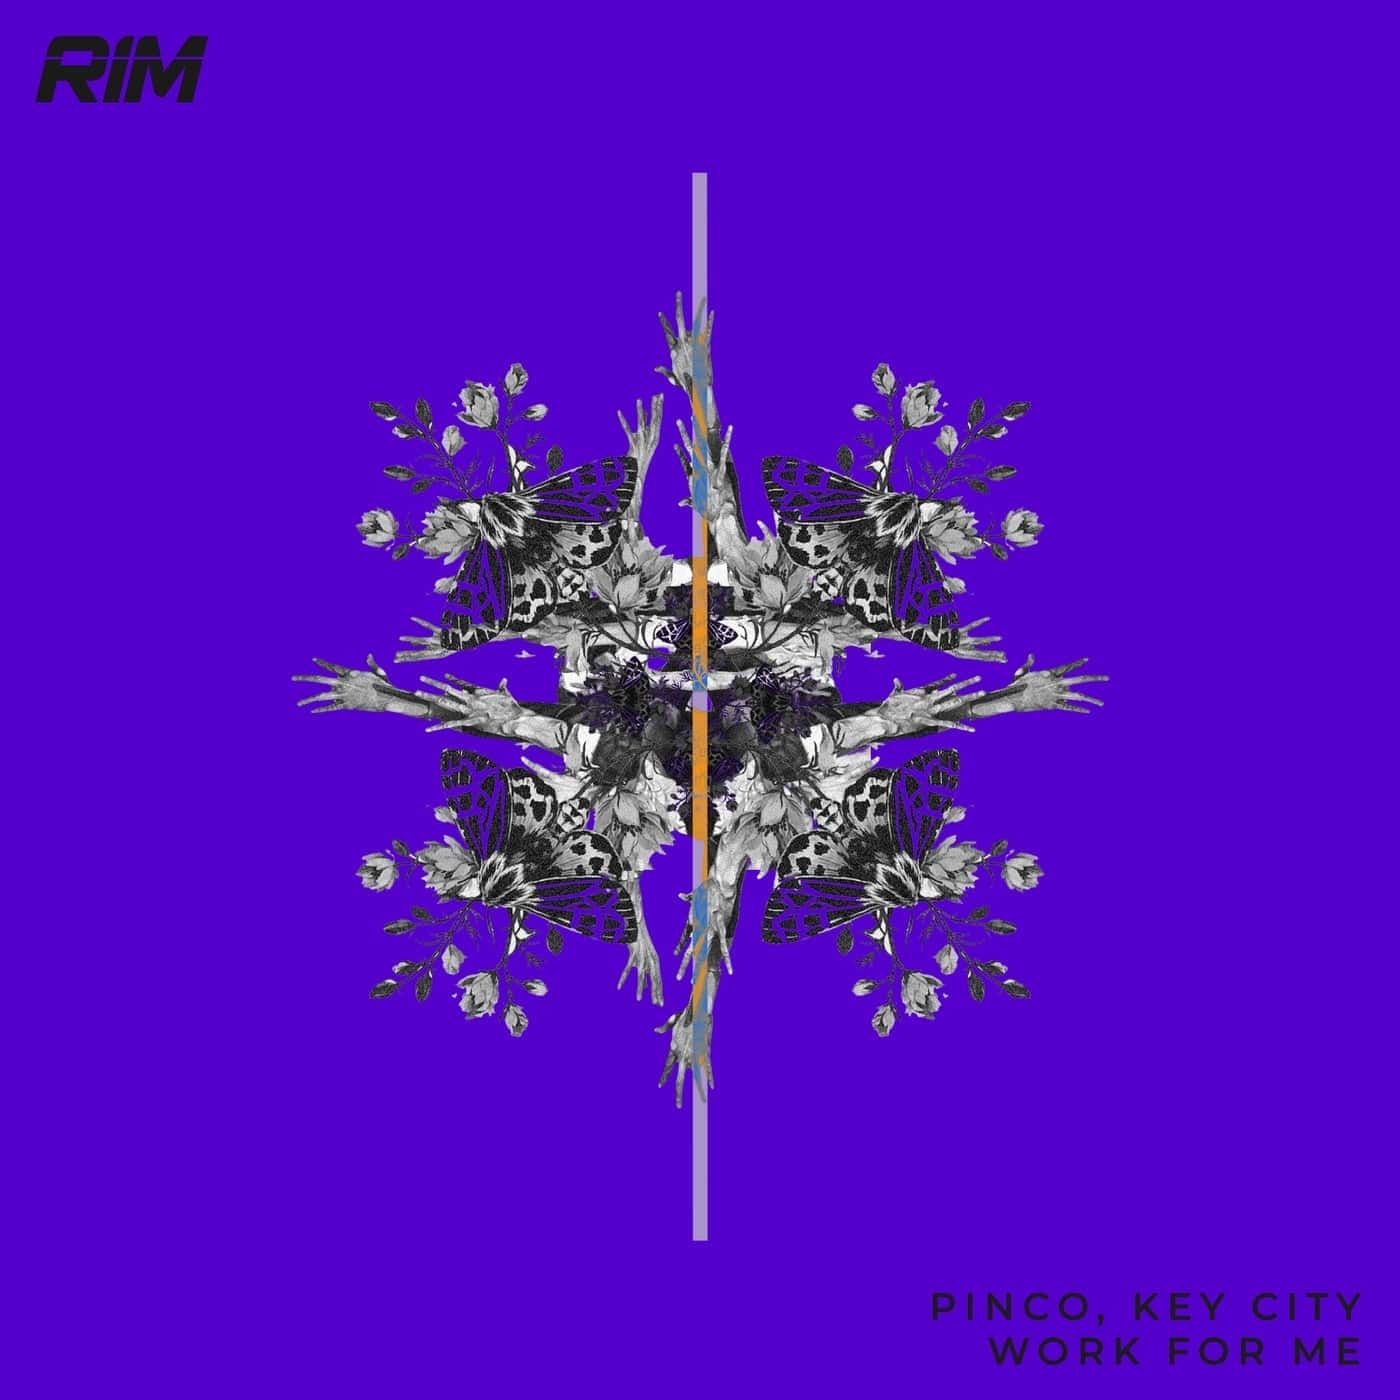 image cover: Pinco, Key City - Work for Me